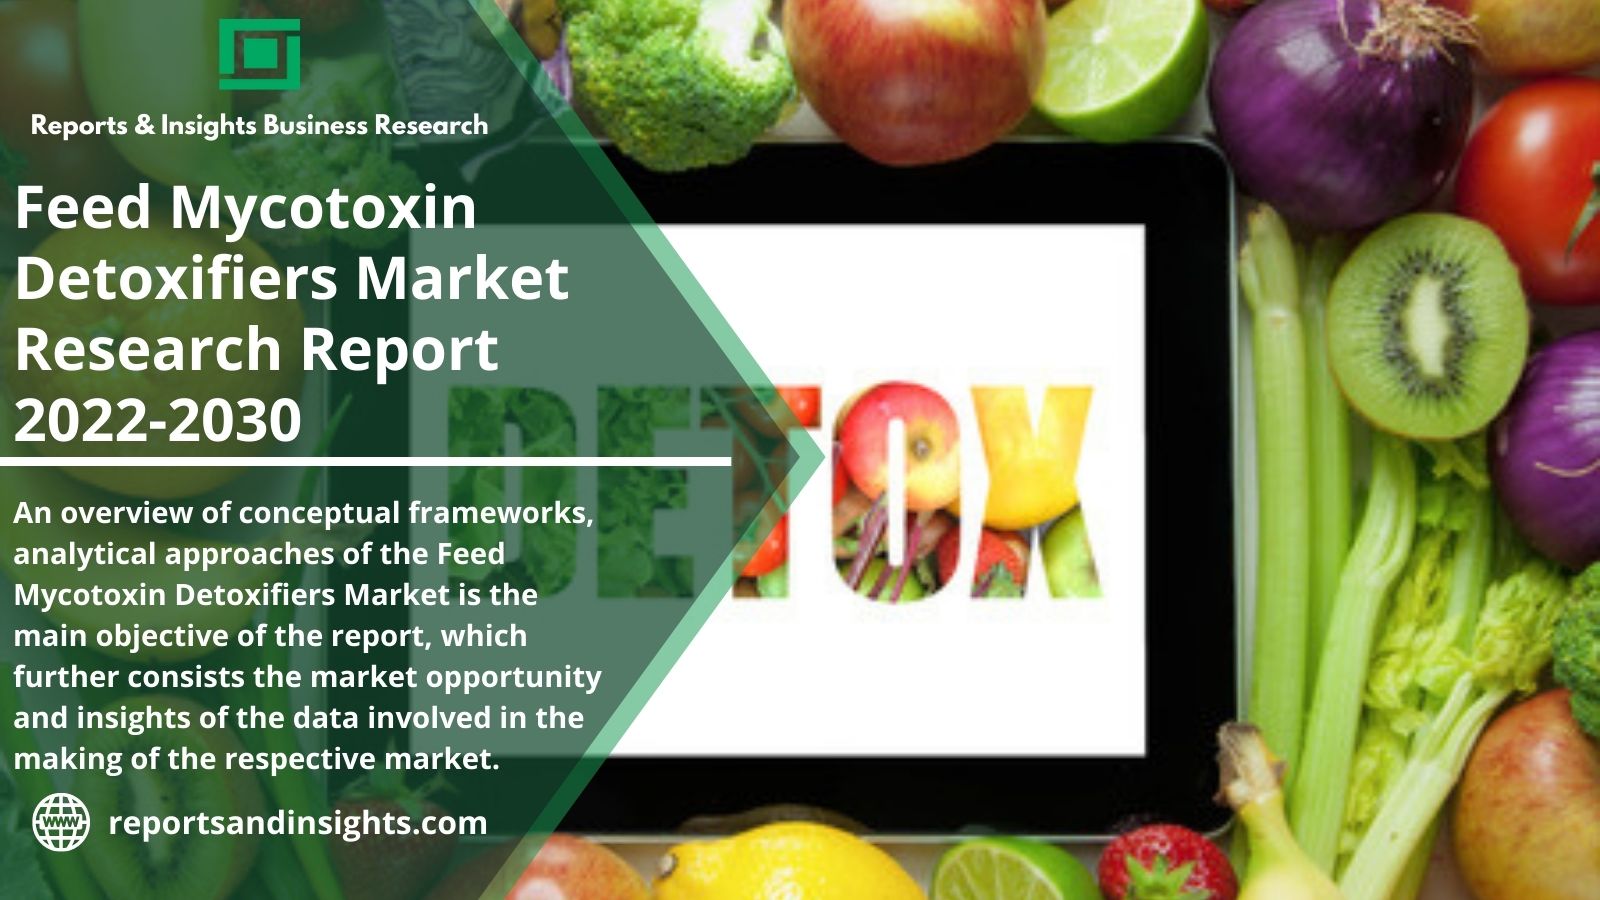 Insight On Feed Mycotoxin Detoxifiers Market Regional Study Report on Future Forecast with Size-2022, Share, Top Players, Supply-Demand Scenario, Trends, Challenges and Opportunities to 2030| Consumers Demand, Manufacturing Demand, Industry Growth Report Declaration by ReportsandInsights.